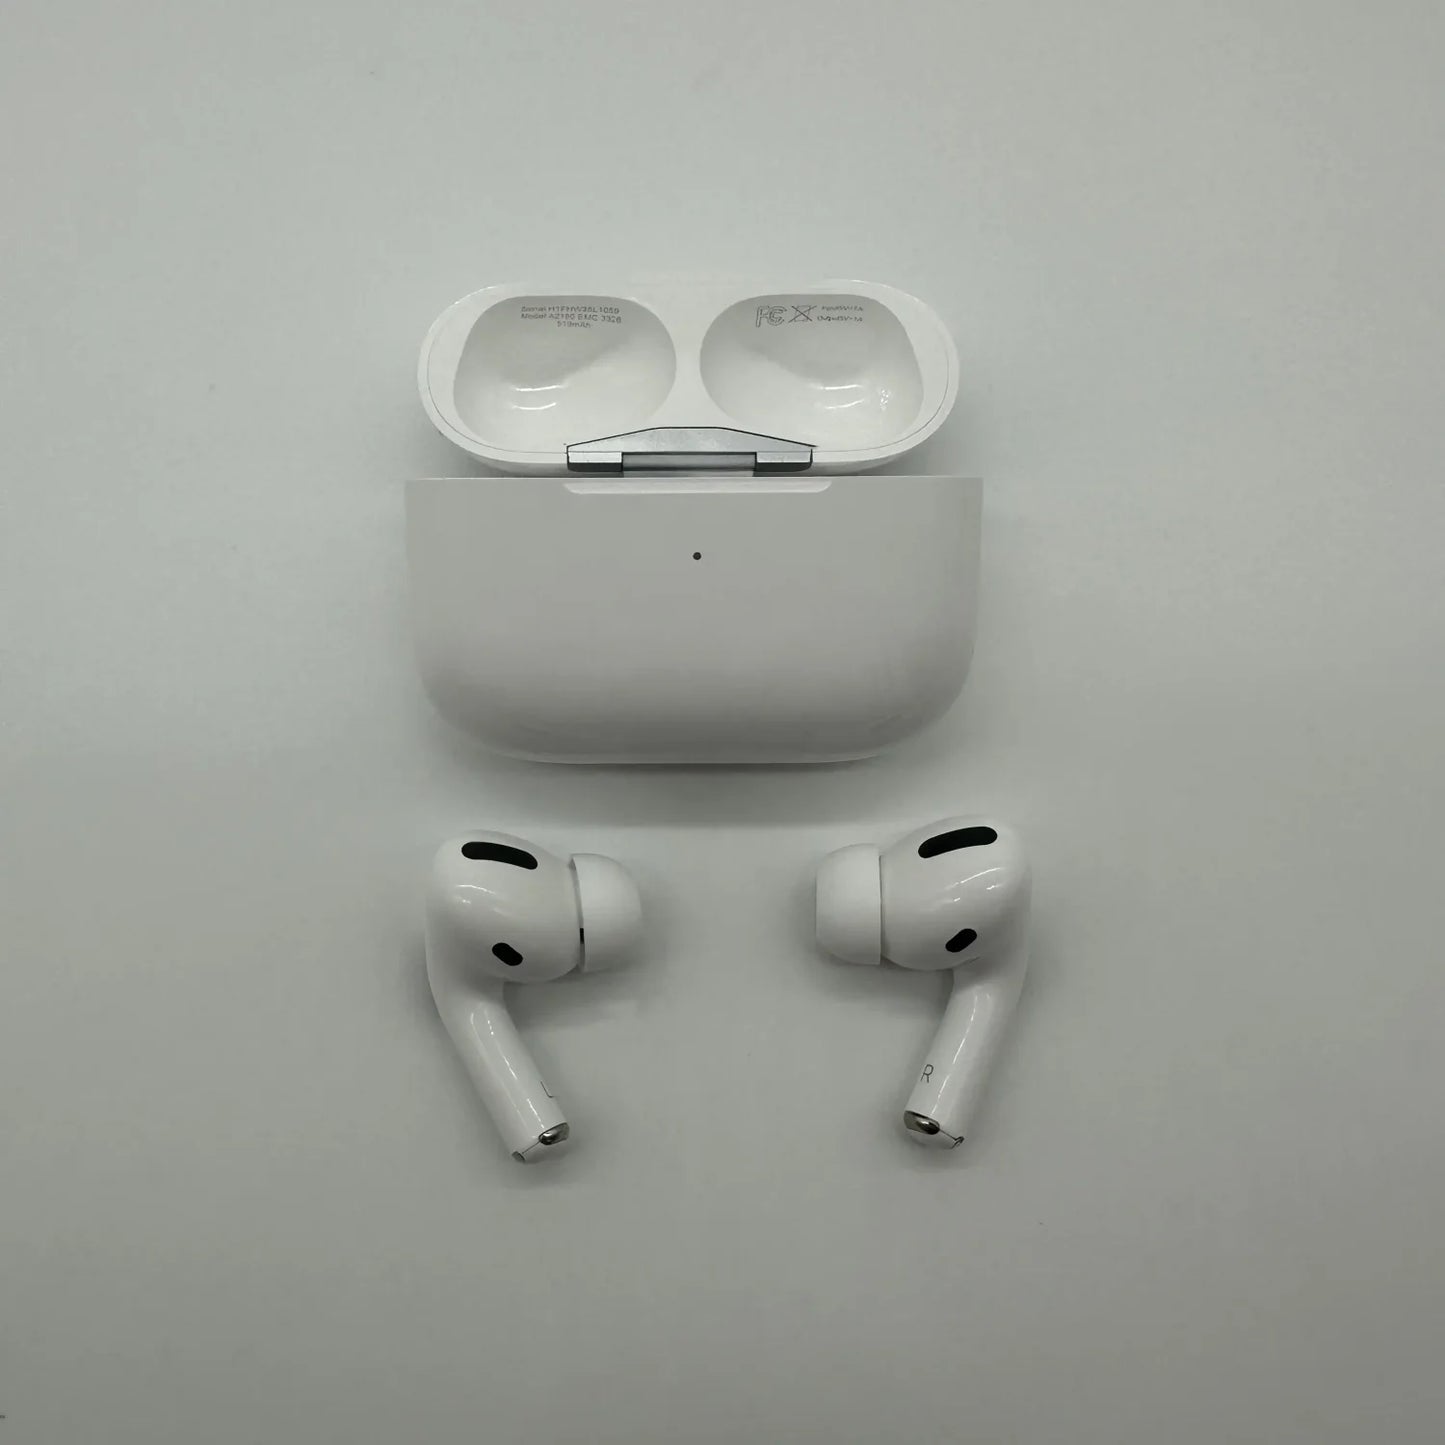 Apple Airpod pro - active noise cancelling